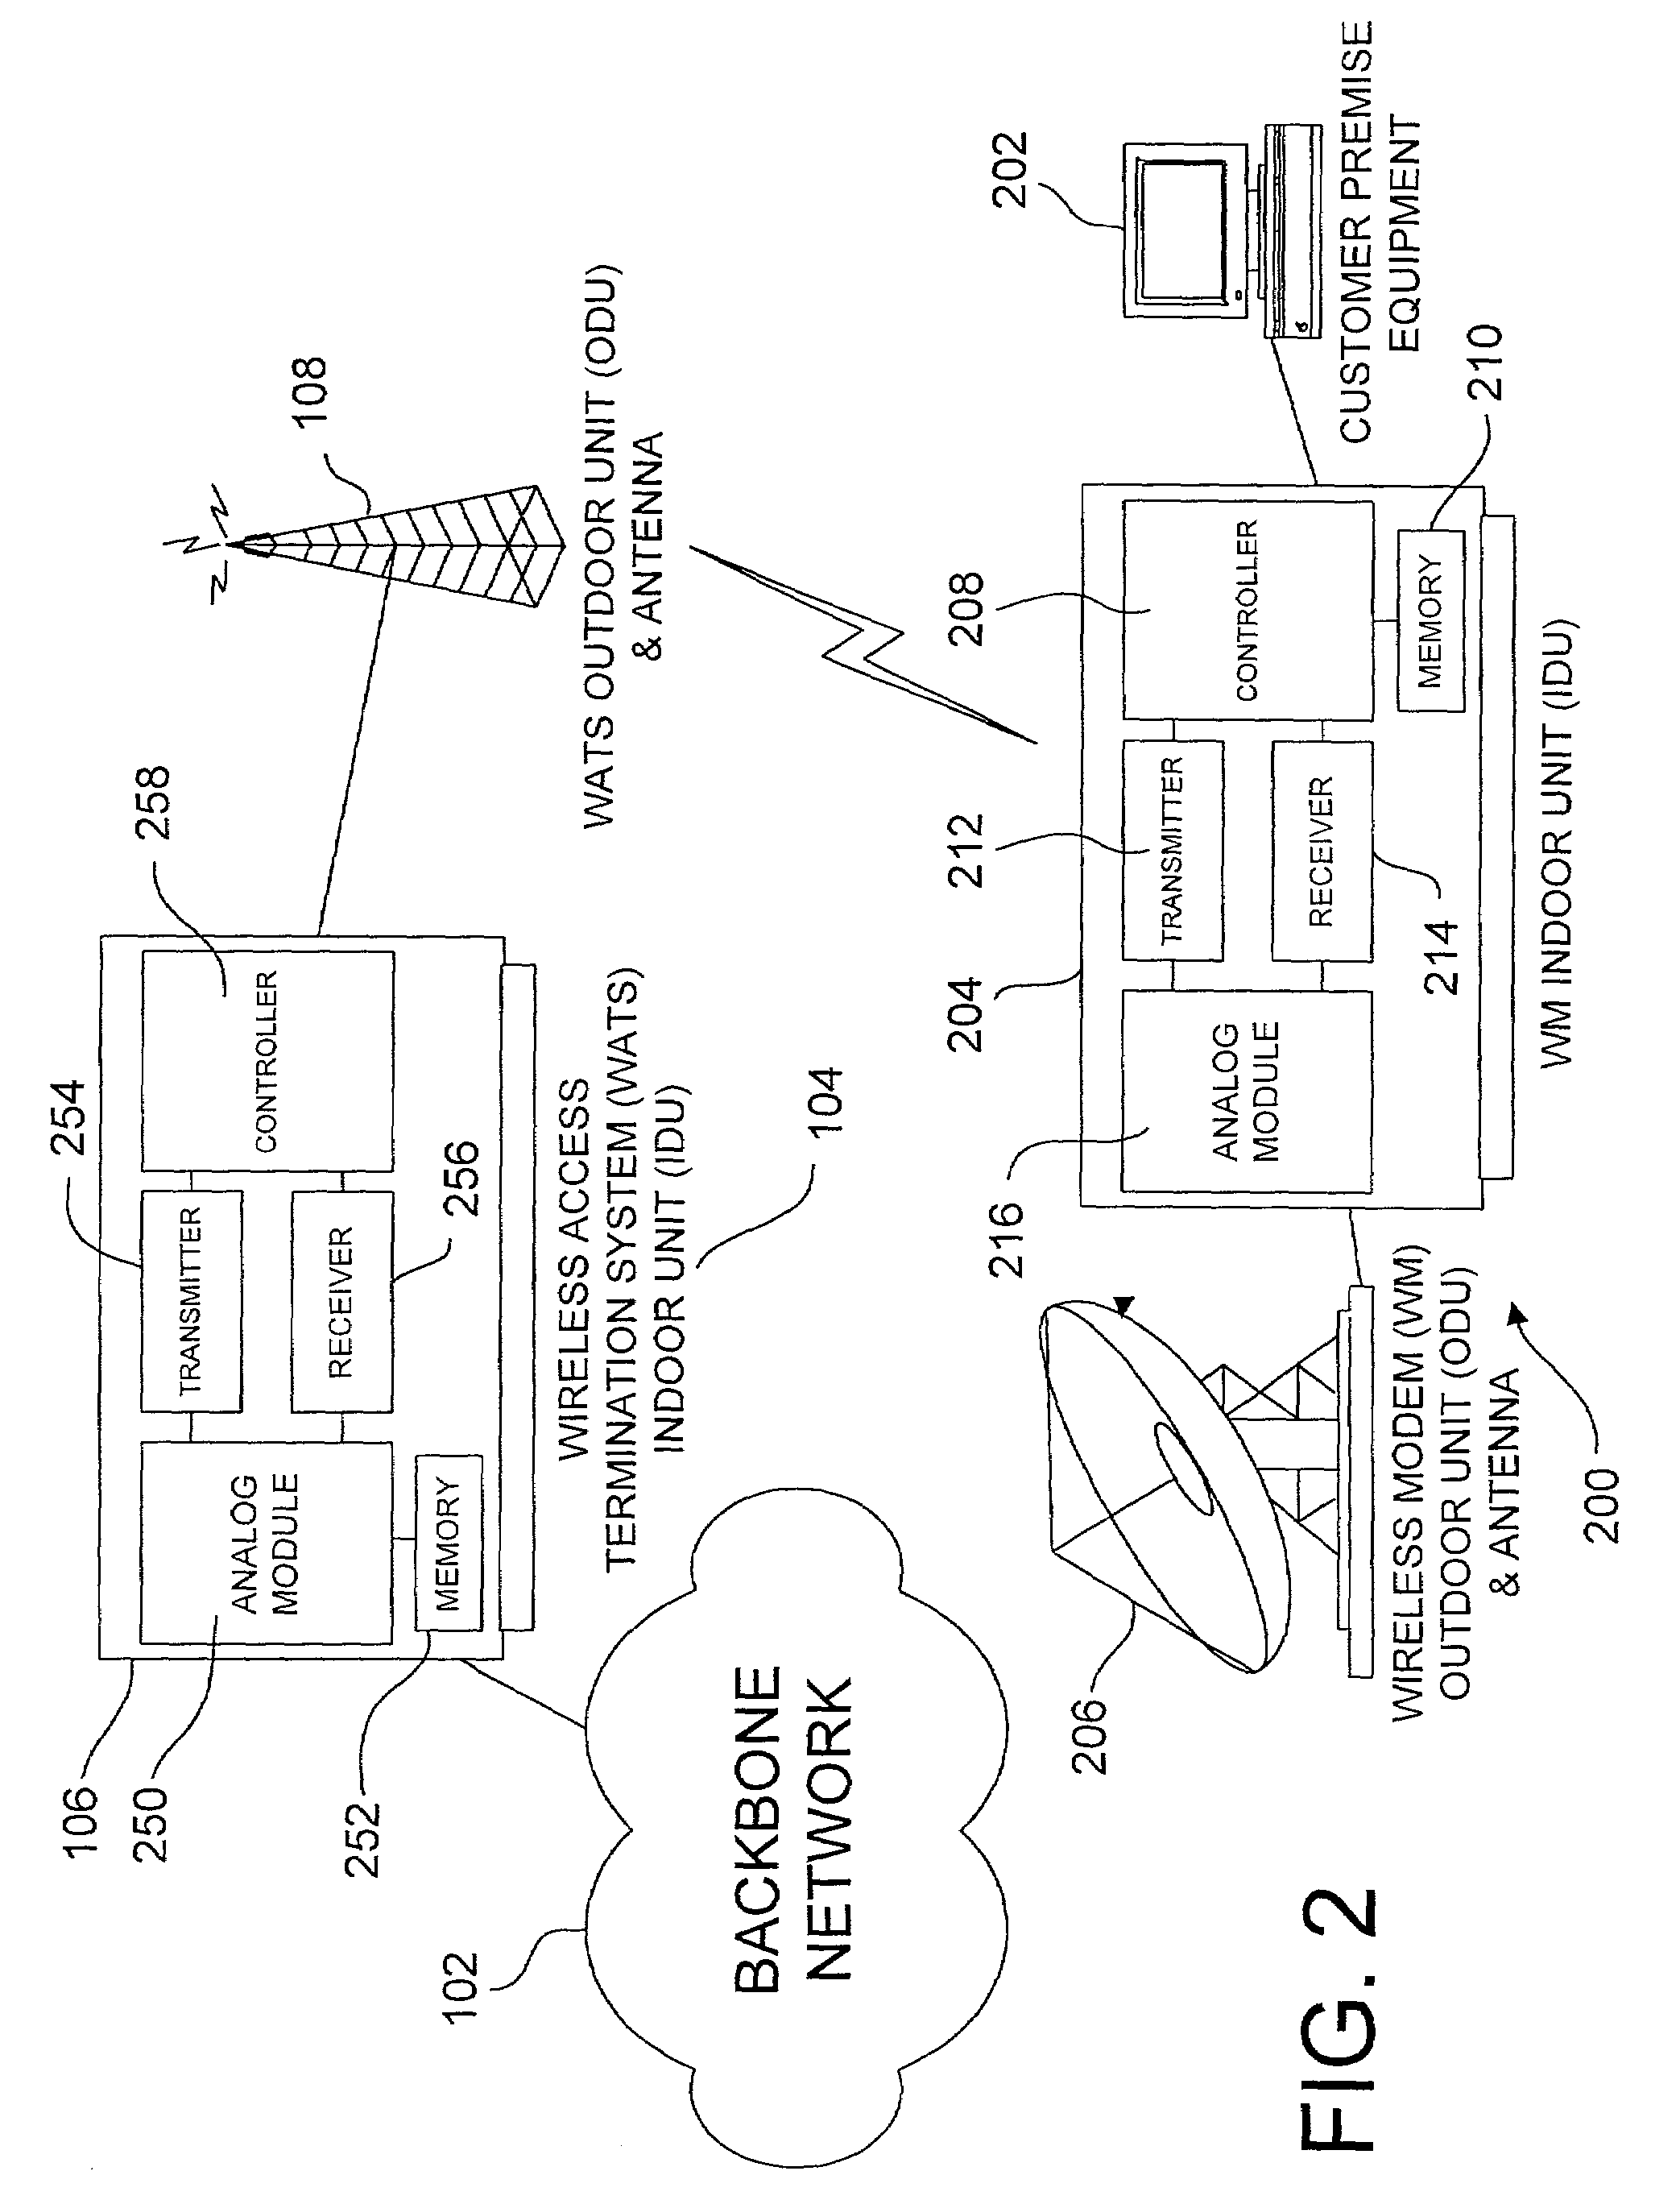 Adaptive modulation for fixed wireless link in cable transmission system